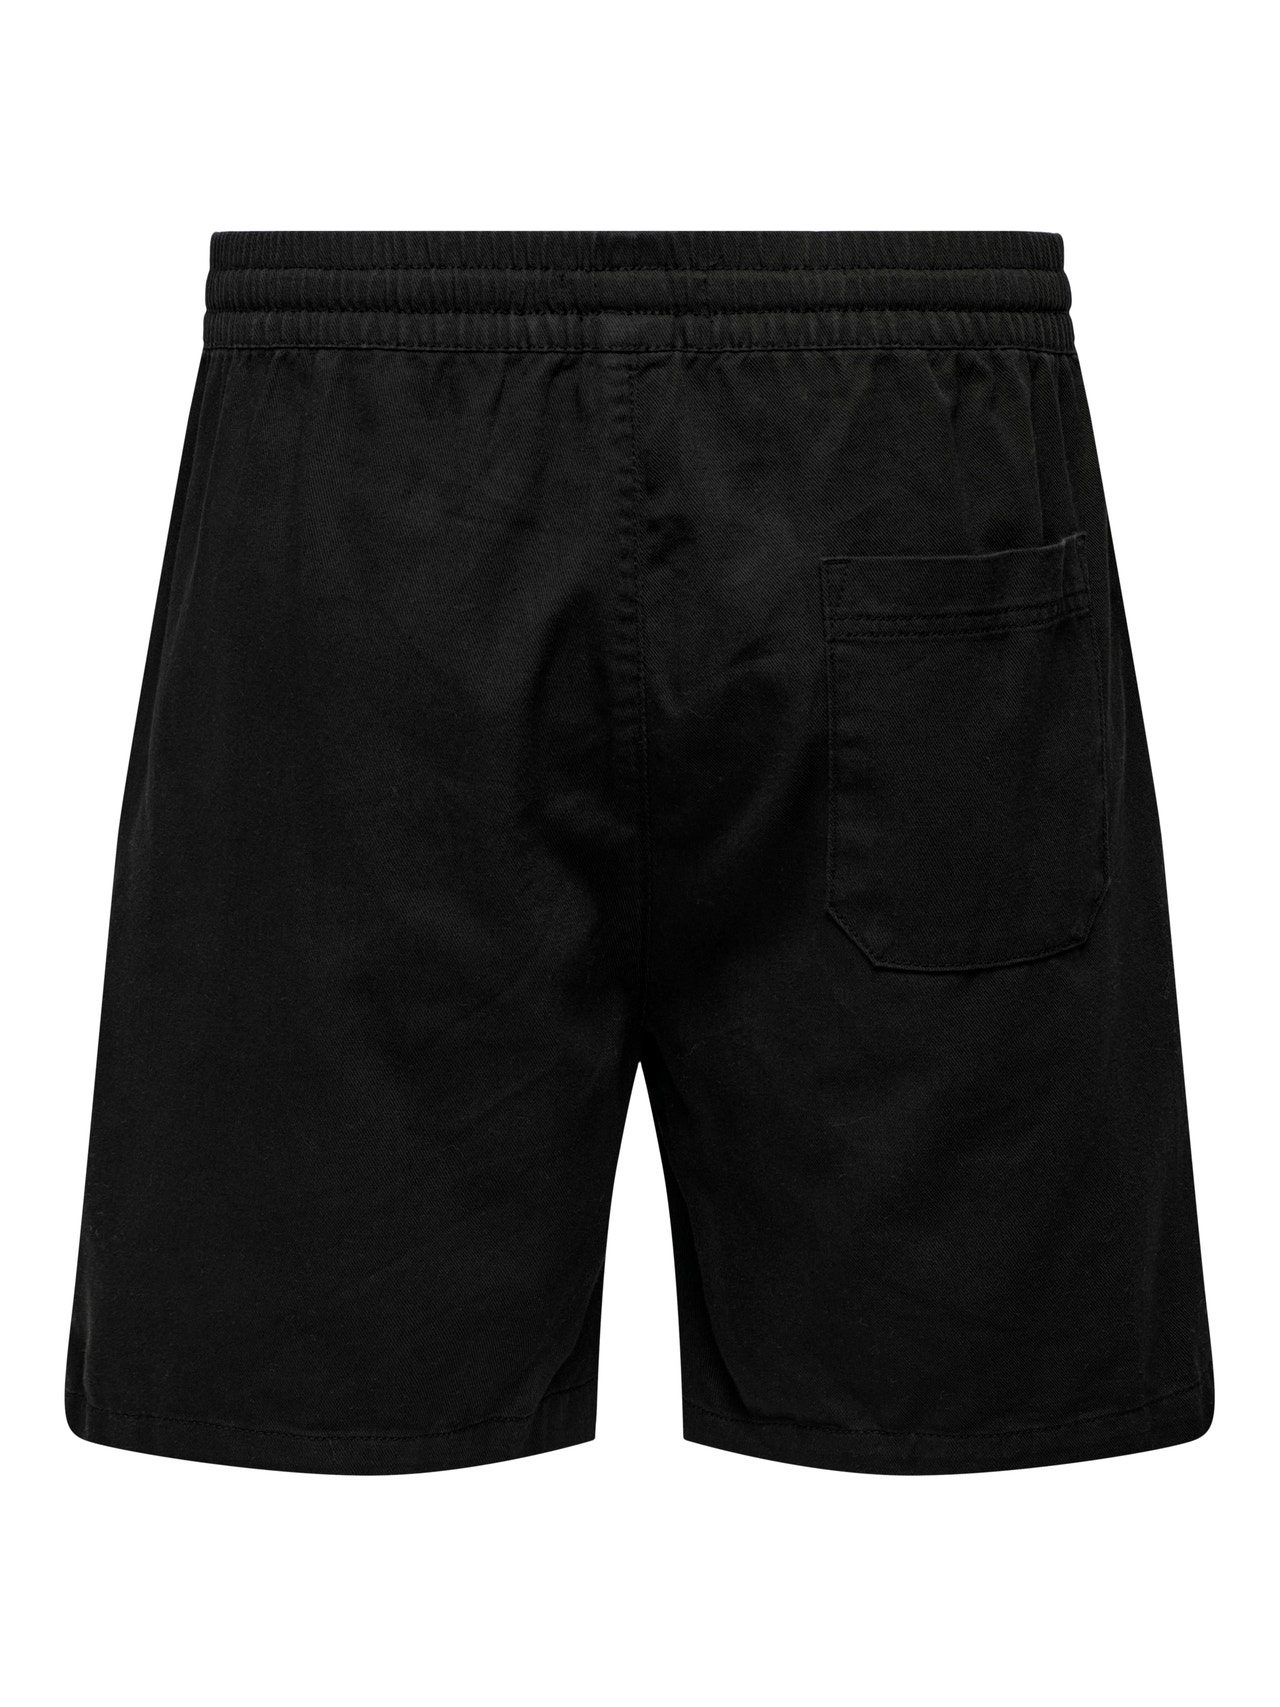 ONLY & SONS Normal geschnitten Mid Rise Shorts -Black - 22025790